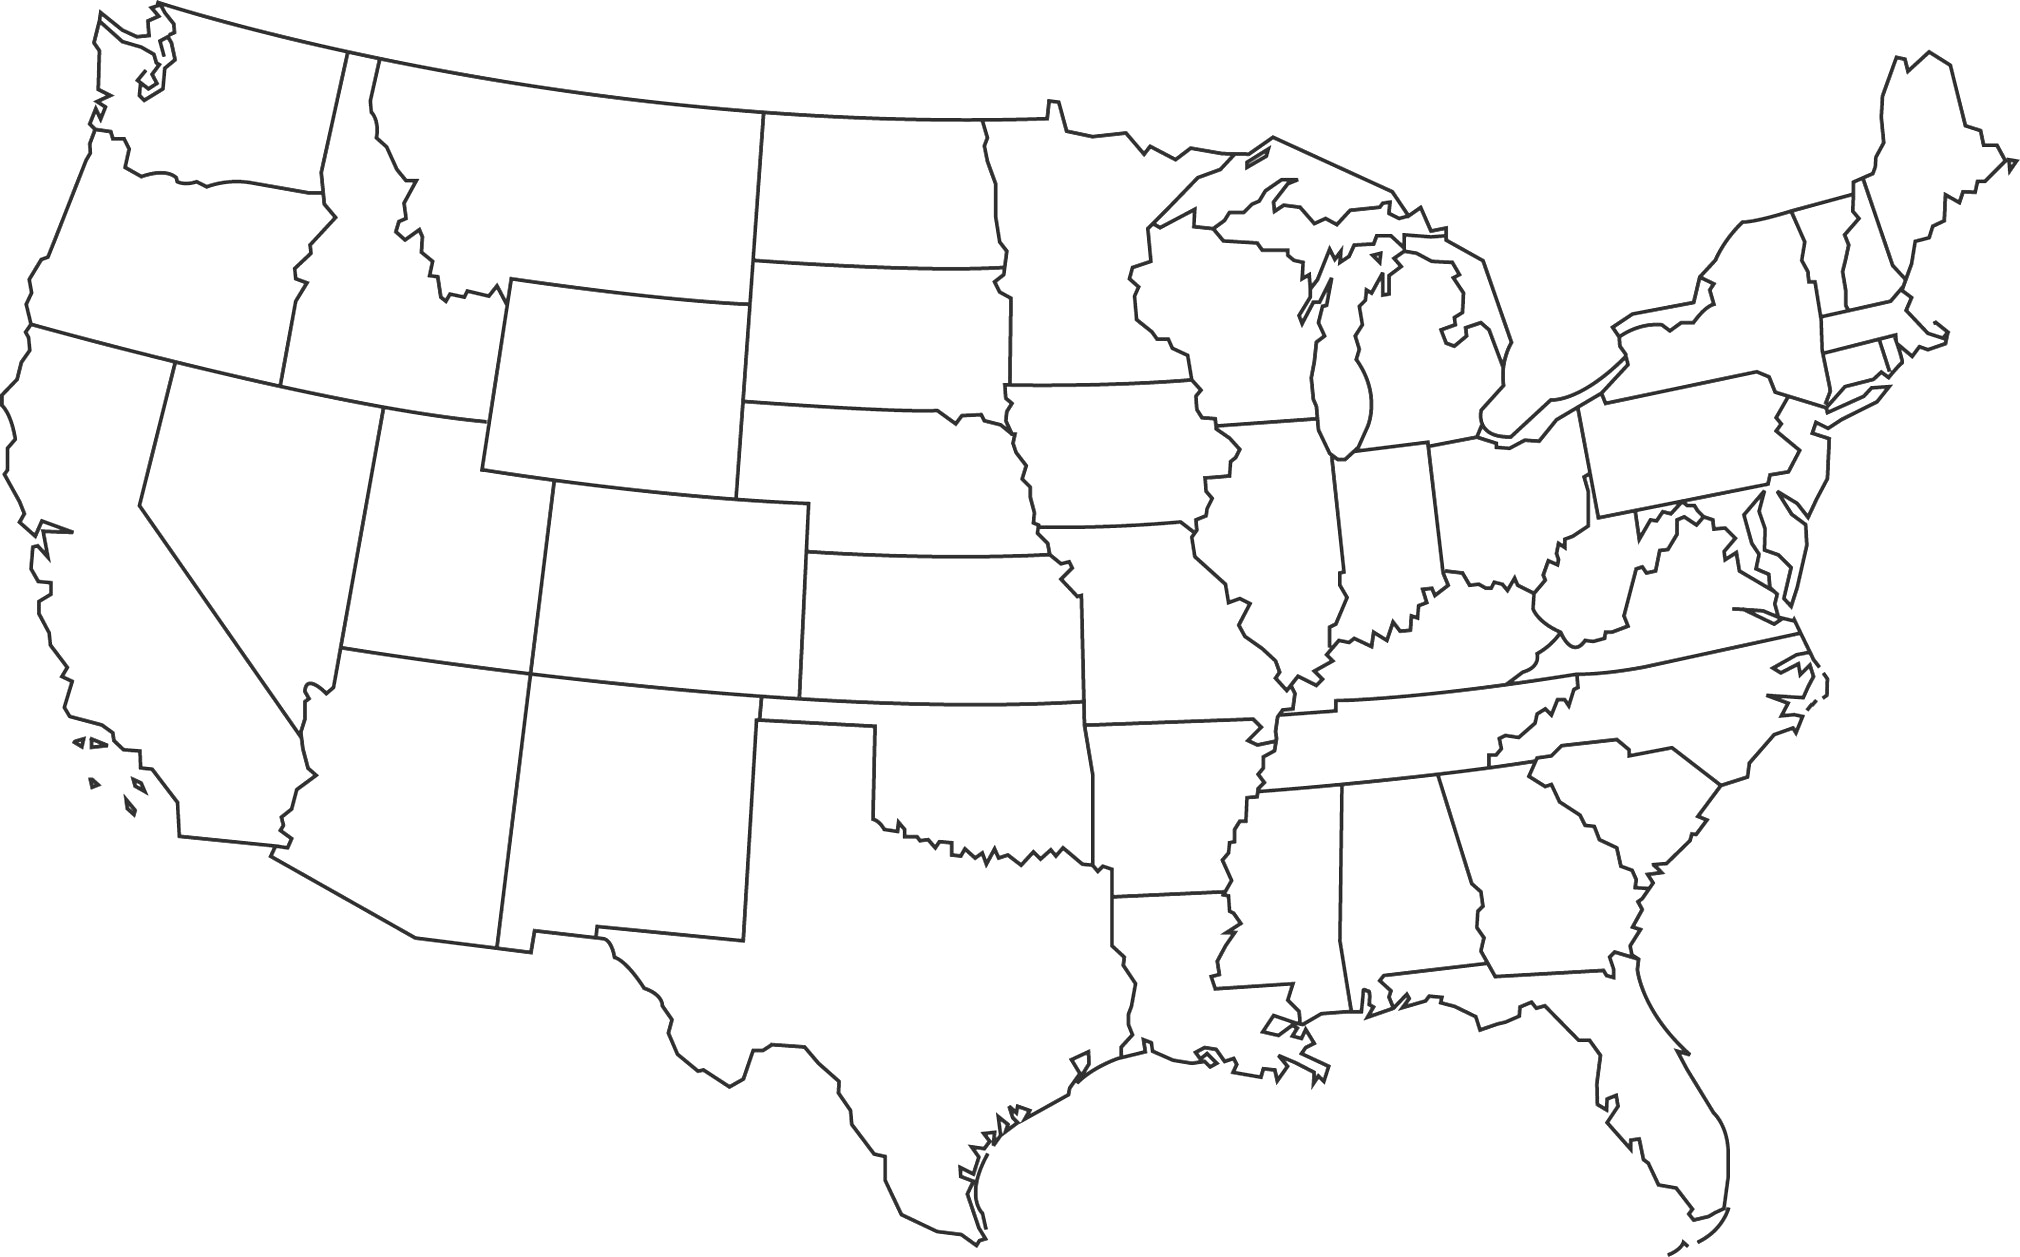 Great How To Draw The Usa of the decade Learn more here 